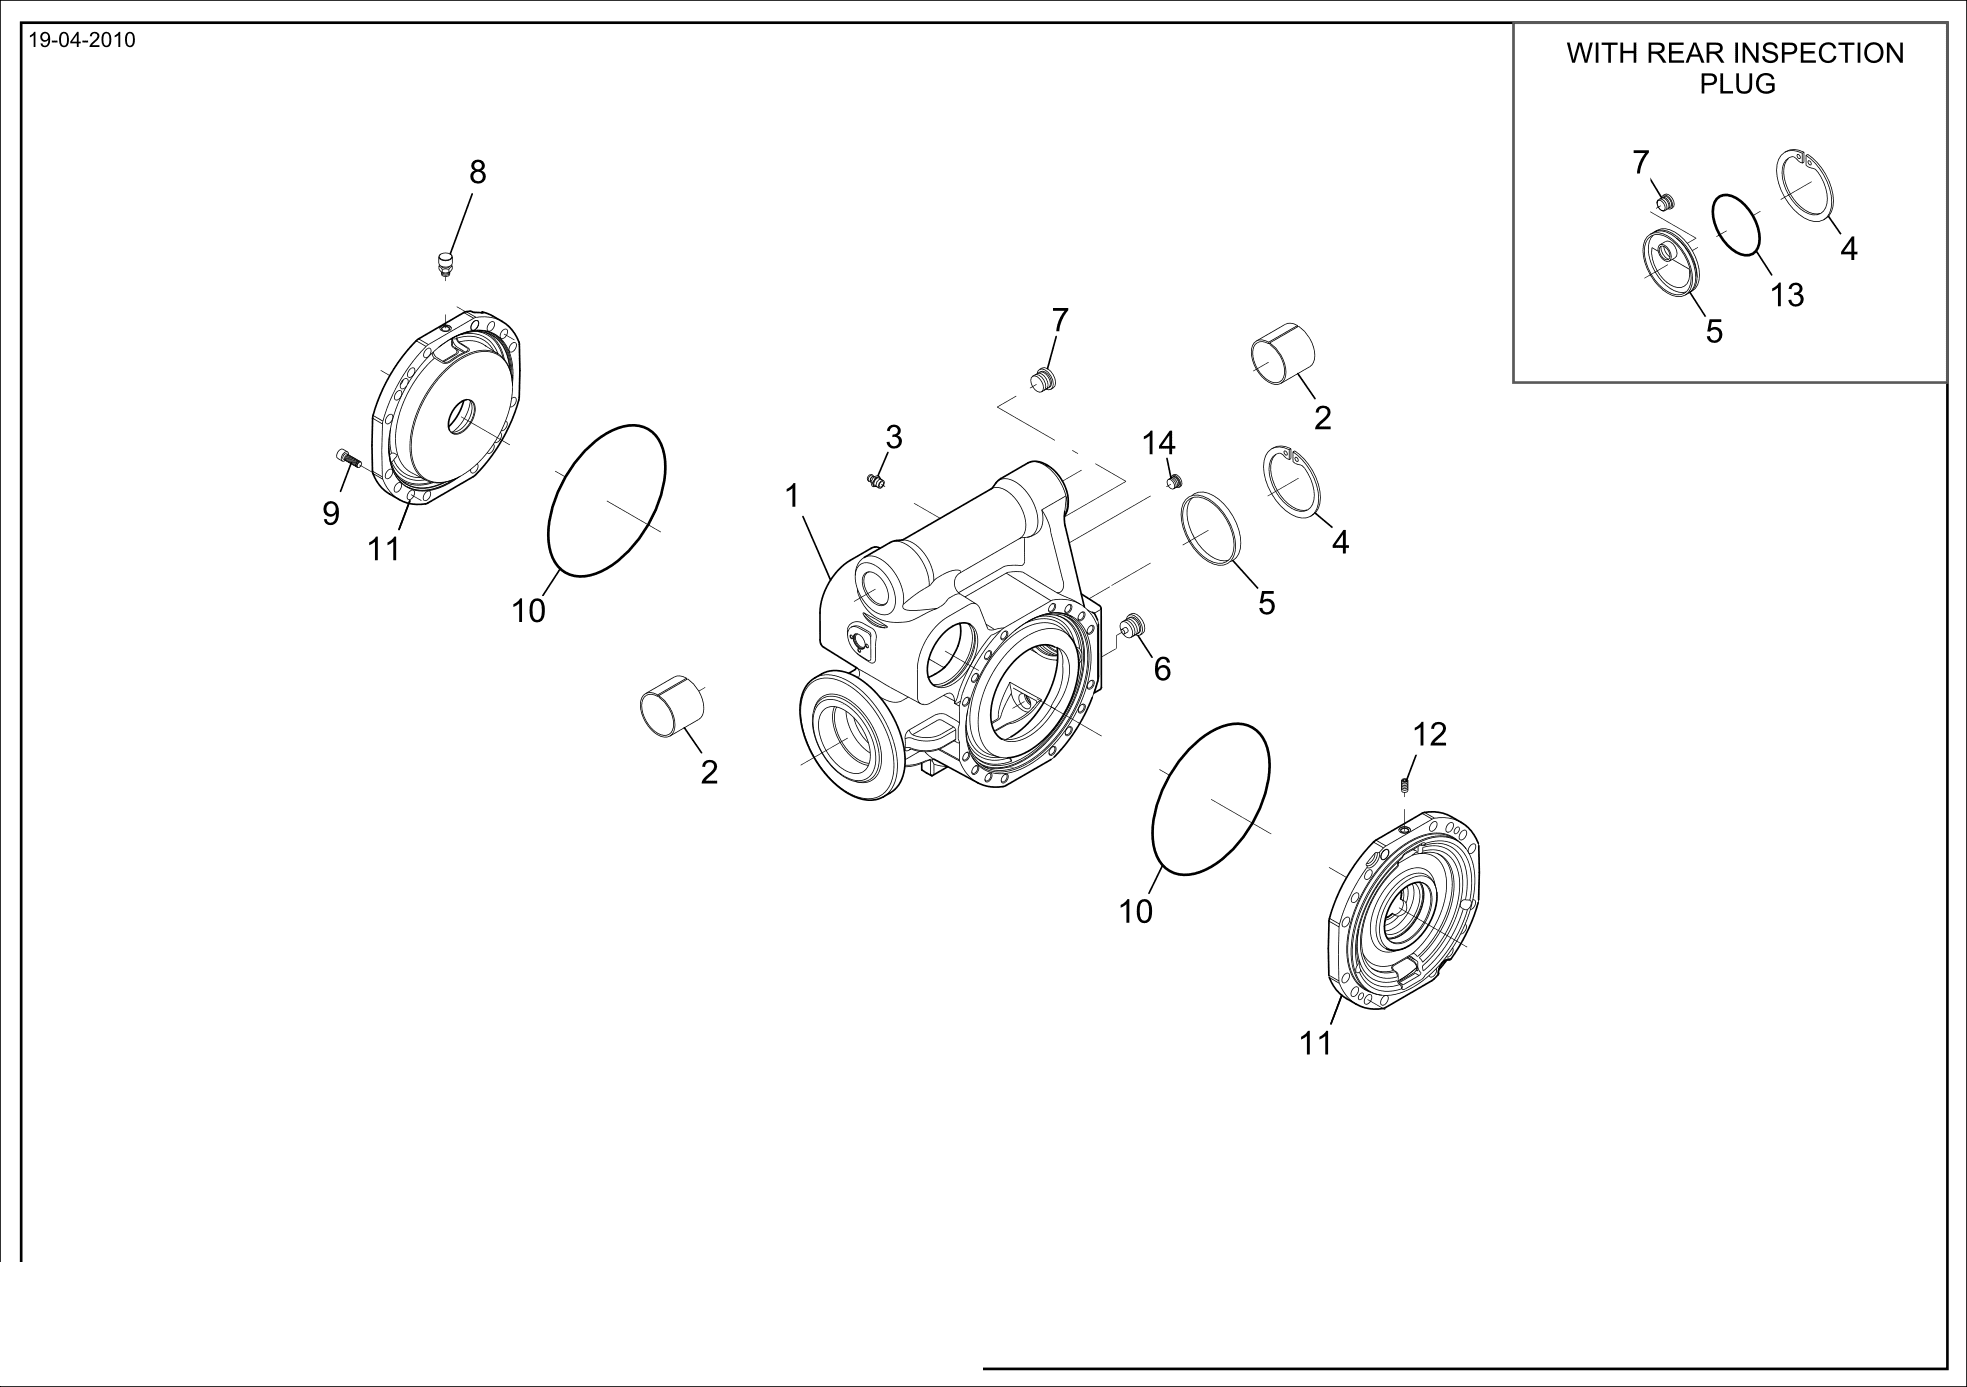 drawing for GHH 1202-0007 - VENT (figure 1)